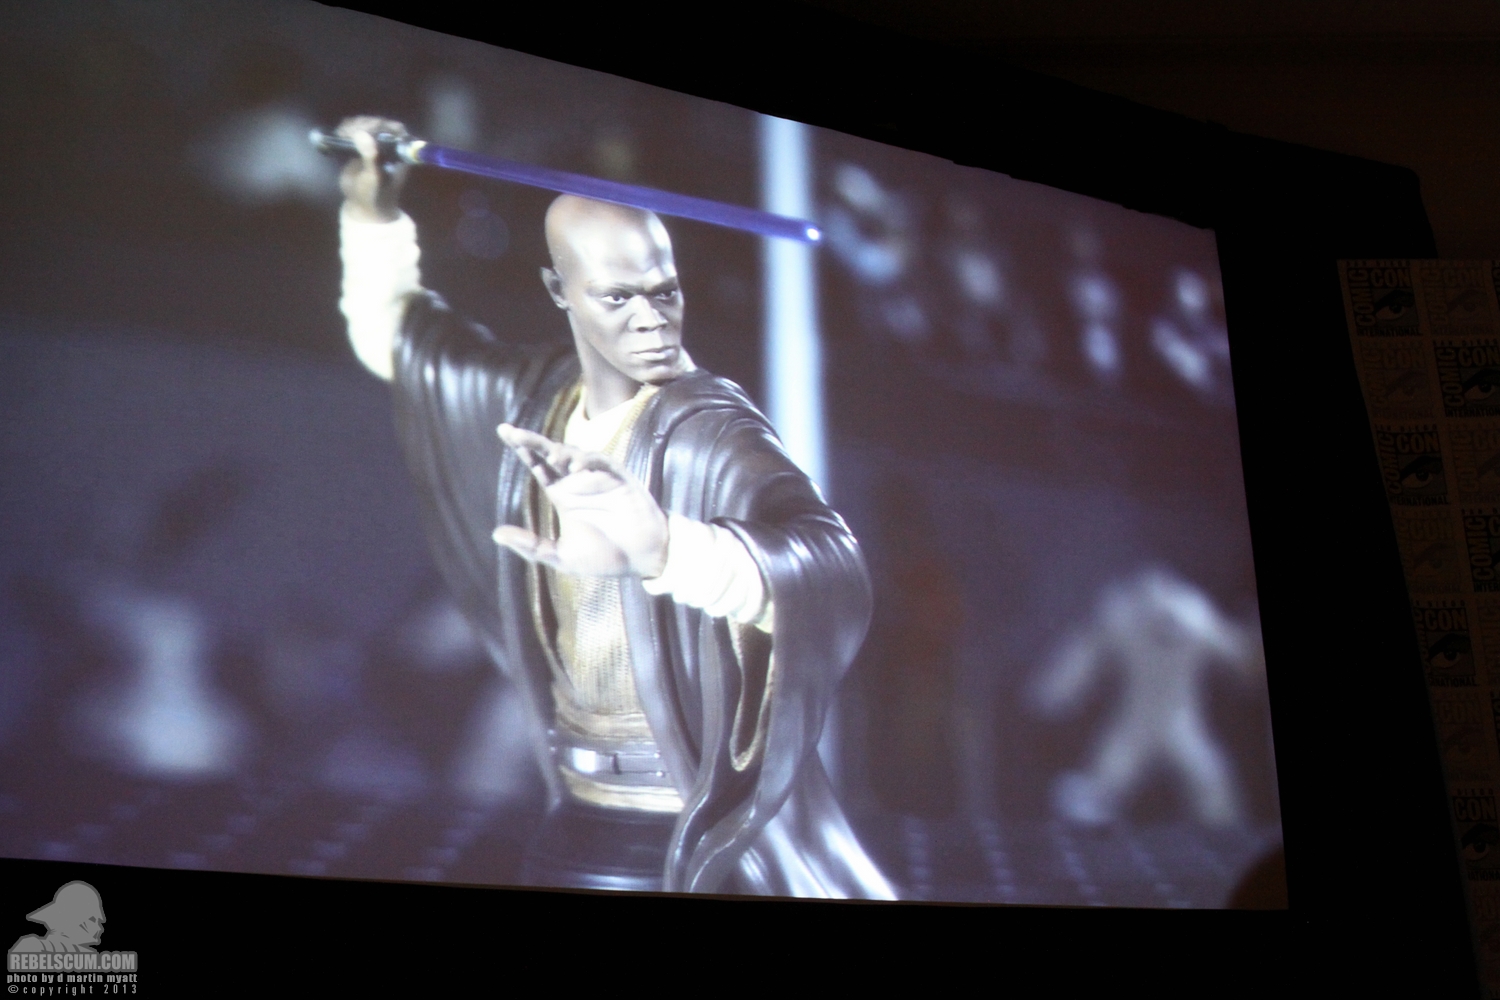 SDCC_2013_Star_Wars_Collecting_Panel_Friday-063.jpg